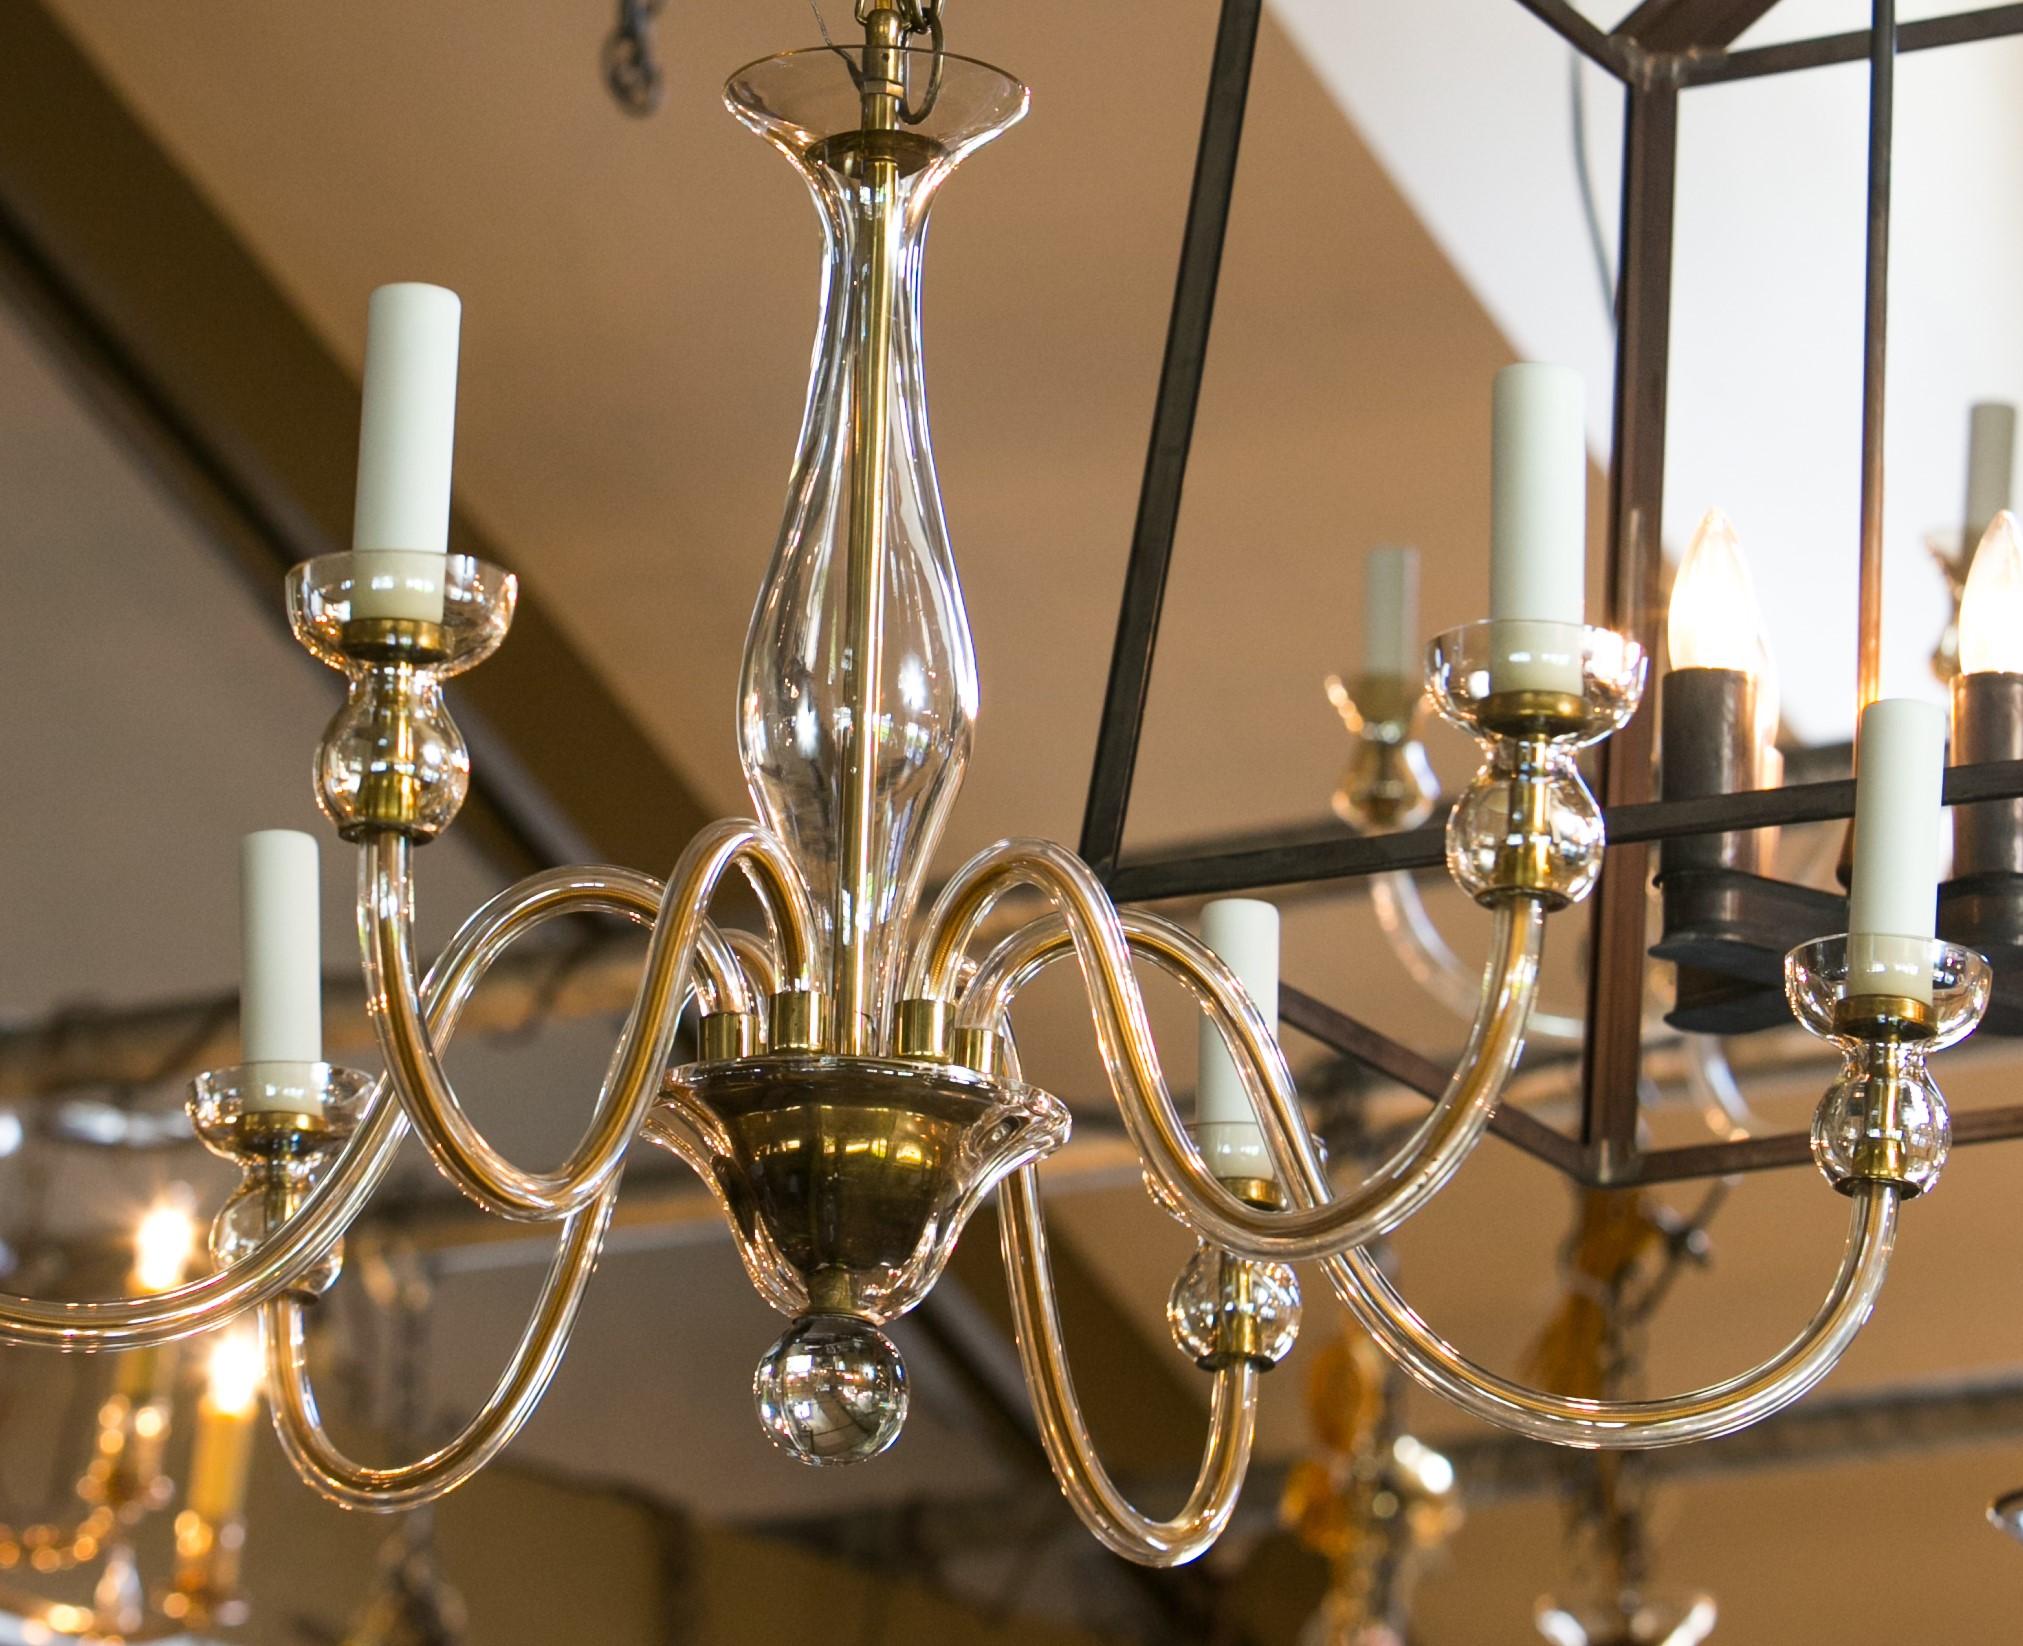 Murano pale amber glass chandelier with six arms. This vintage Italian hand-blown chandelier is newly wired for use within the USA. If one prefers a more tan color of candle sleeves instead of ivory (as illustrated), they can be changed out. This